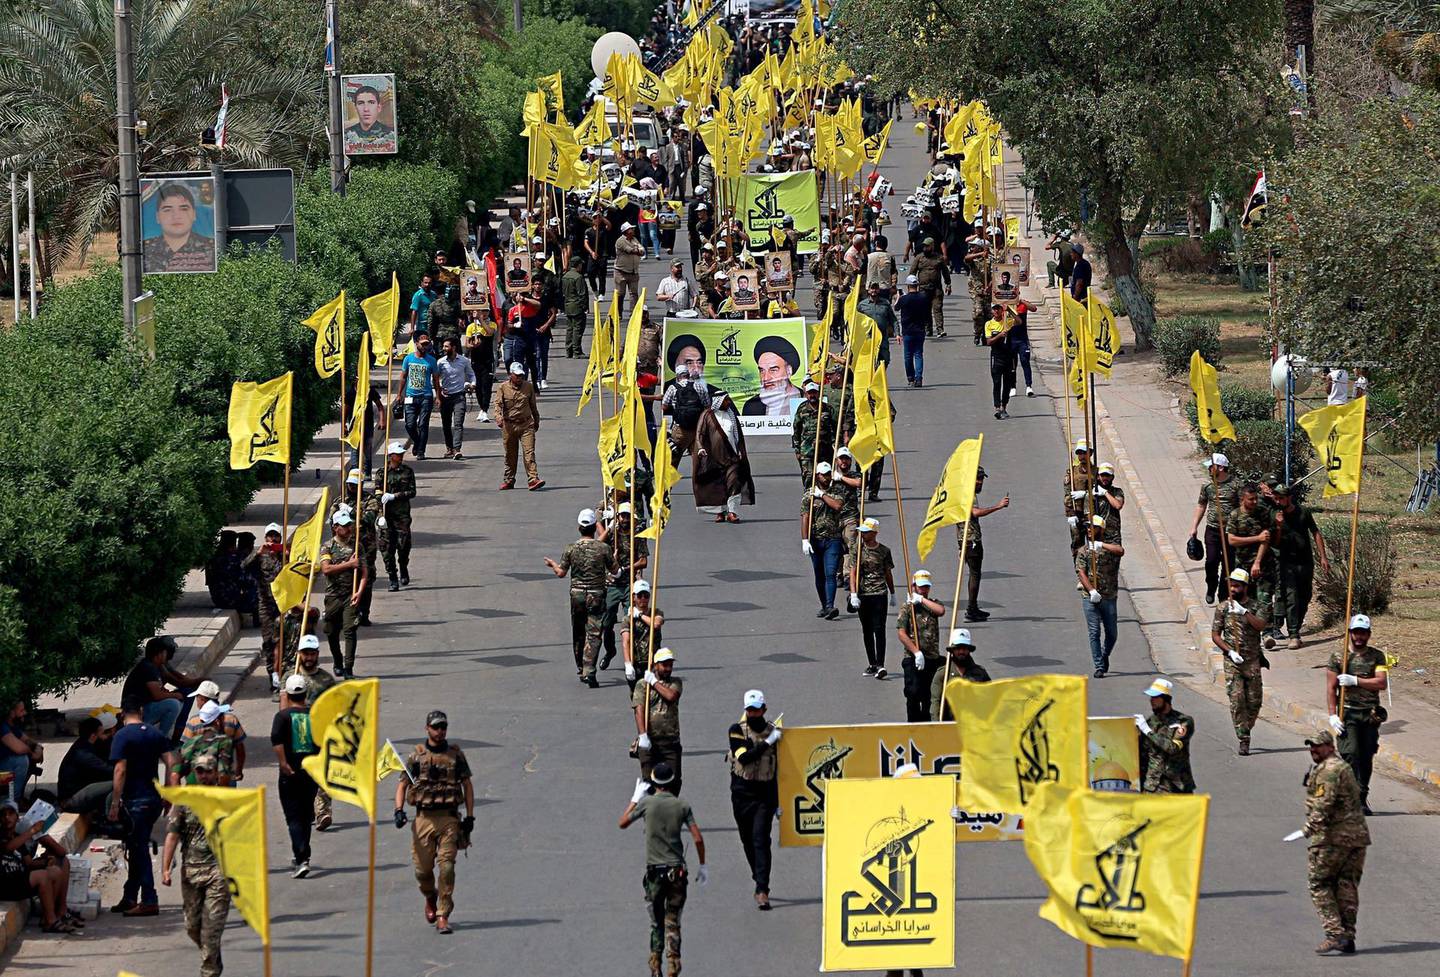 In this June 8, 2018 file photo, Iraqi Popular Mobilization Forces march as they hold their flag and posters of Iraqi and Iranian Shiites spiritual leaders during "al-Quds" or Jerusalem Day, in Baghdad, Iraq. The Trump administration will resume crushing oil sanctions on Iran in Nov. 2018, a step that aims to strain Tehranâ€™s funding of its regional allies. Iranian-backed militias in Iraq are buffered to an extent from any financial crunch because they also get funding from the Baghdad government, which is nominally a U.S. ally.  (AP Photo/Hadi Mizban, File)